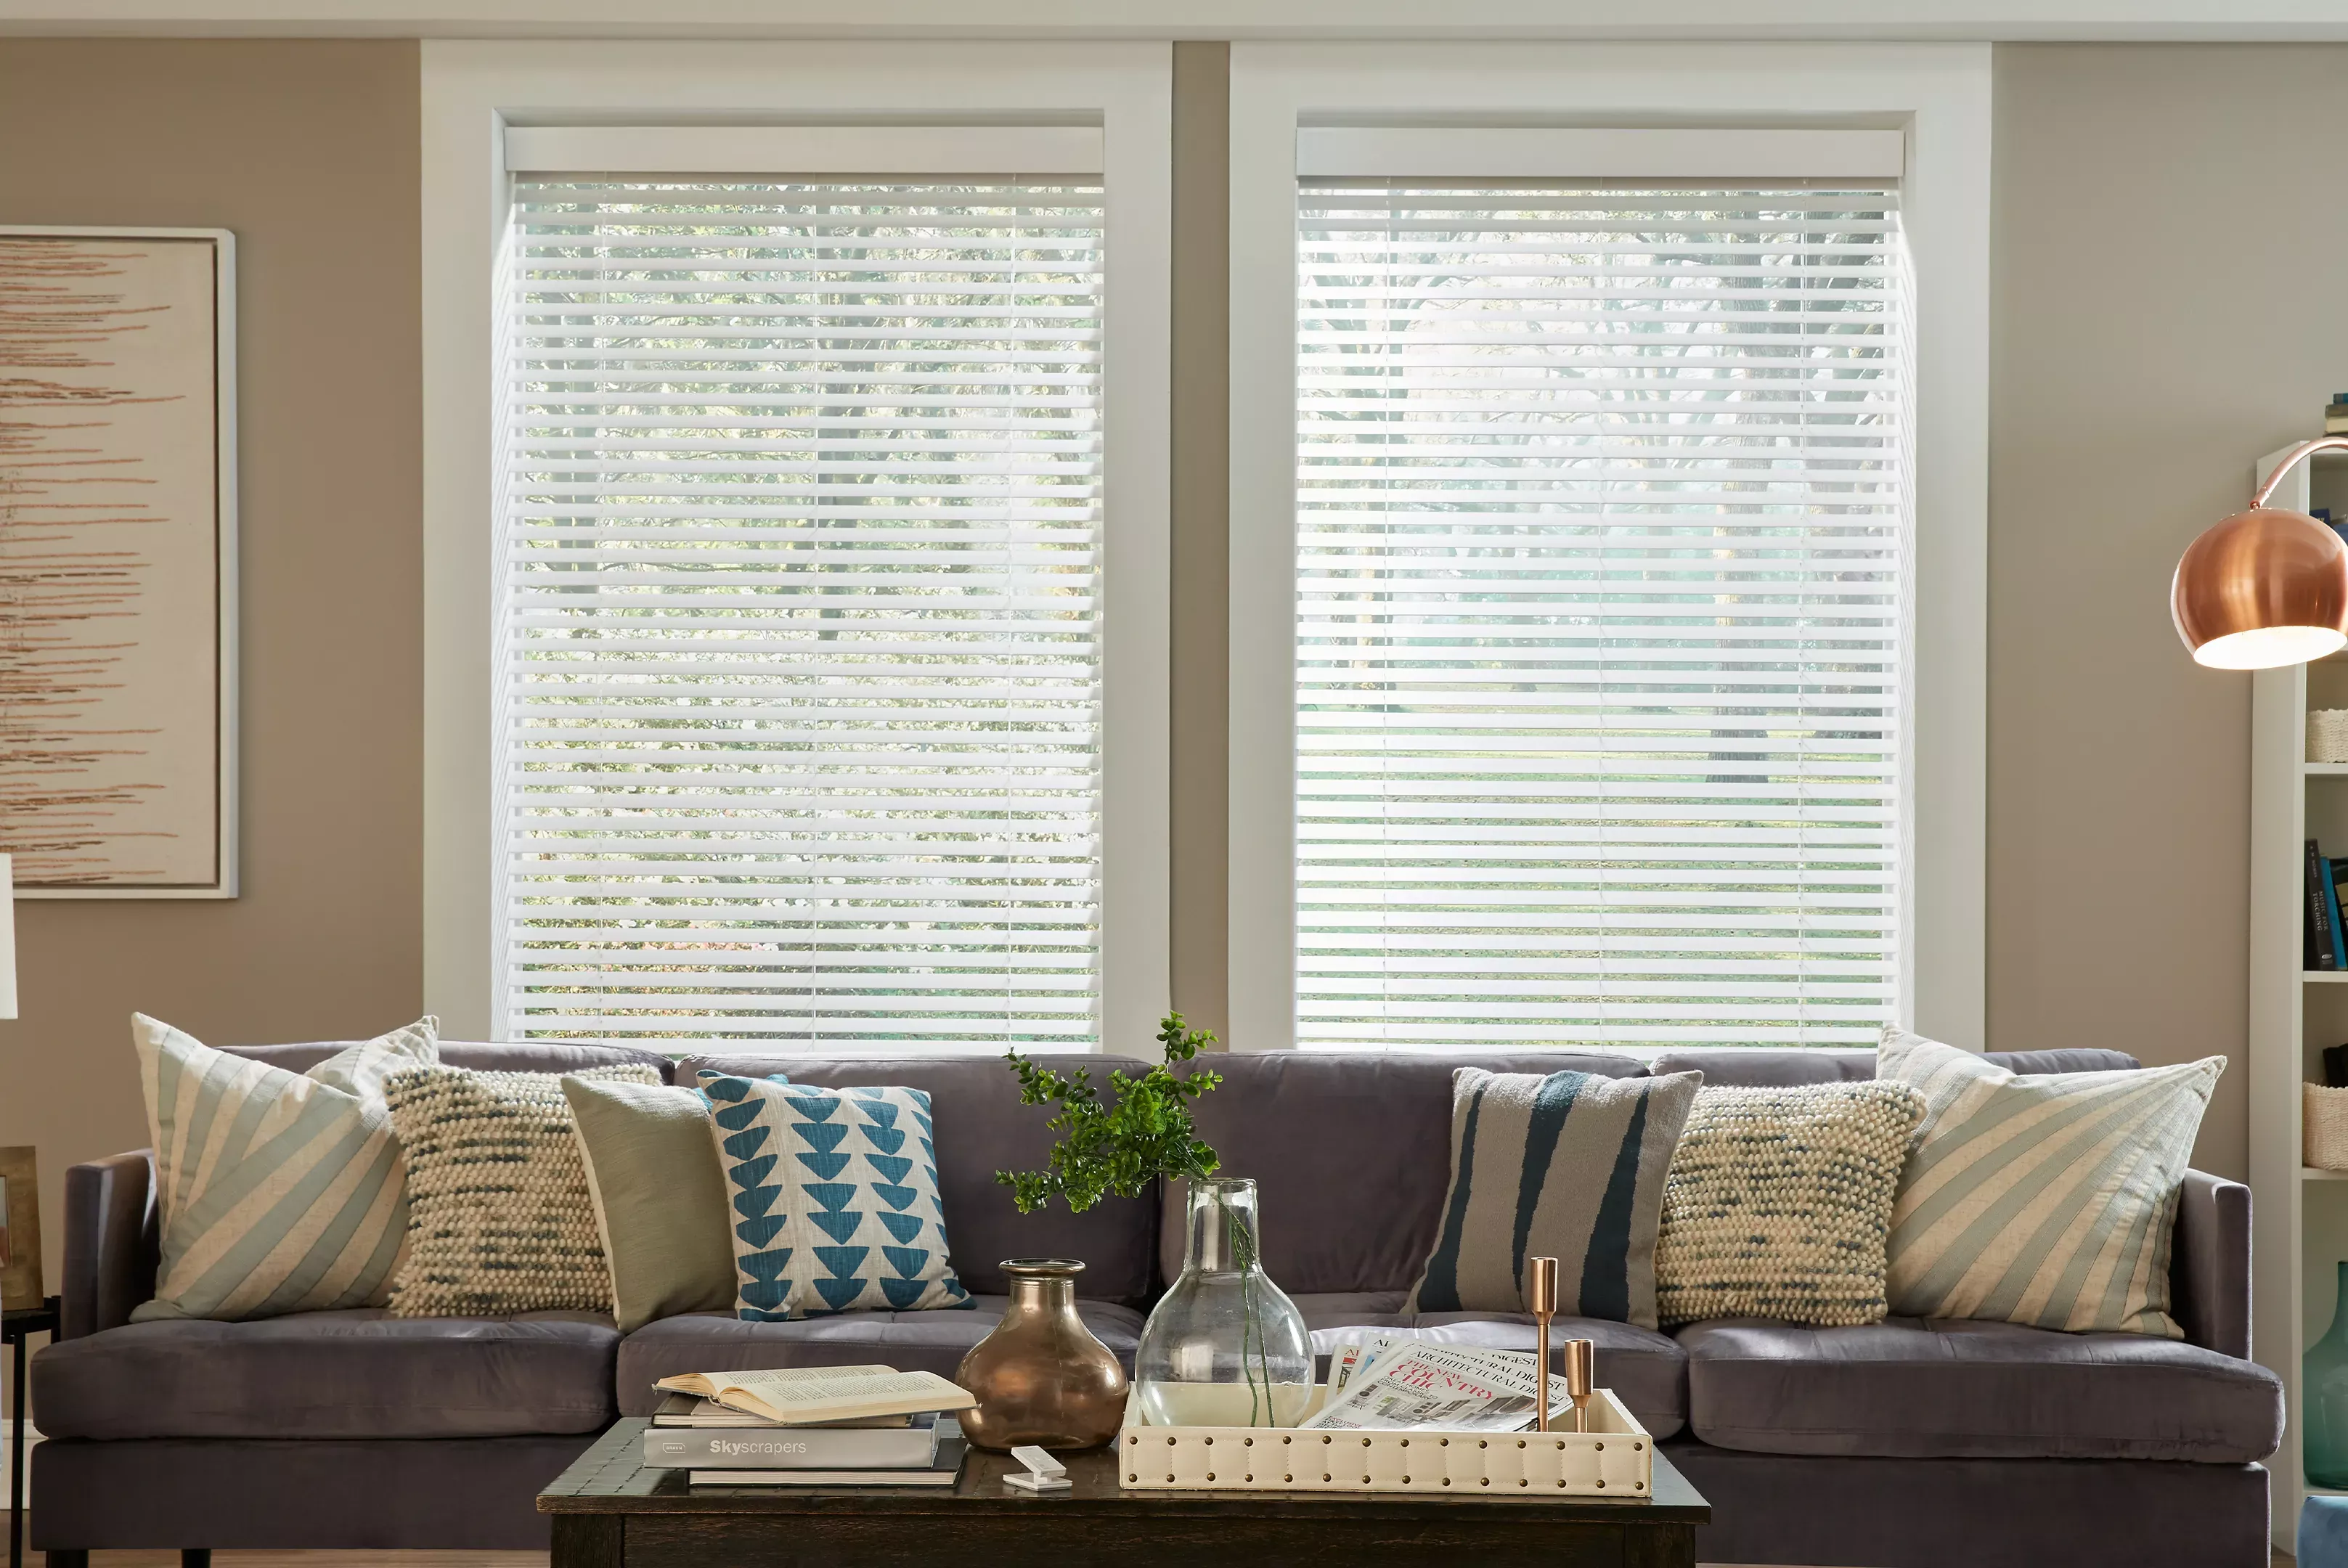 Wood blinds with intelligent tilt alignment balance views and privacy in living room